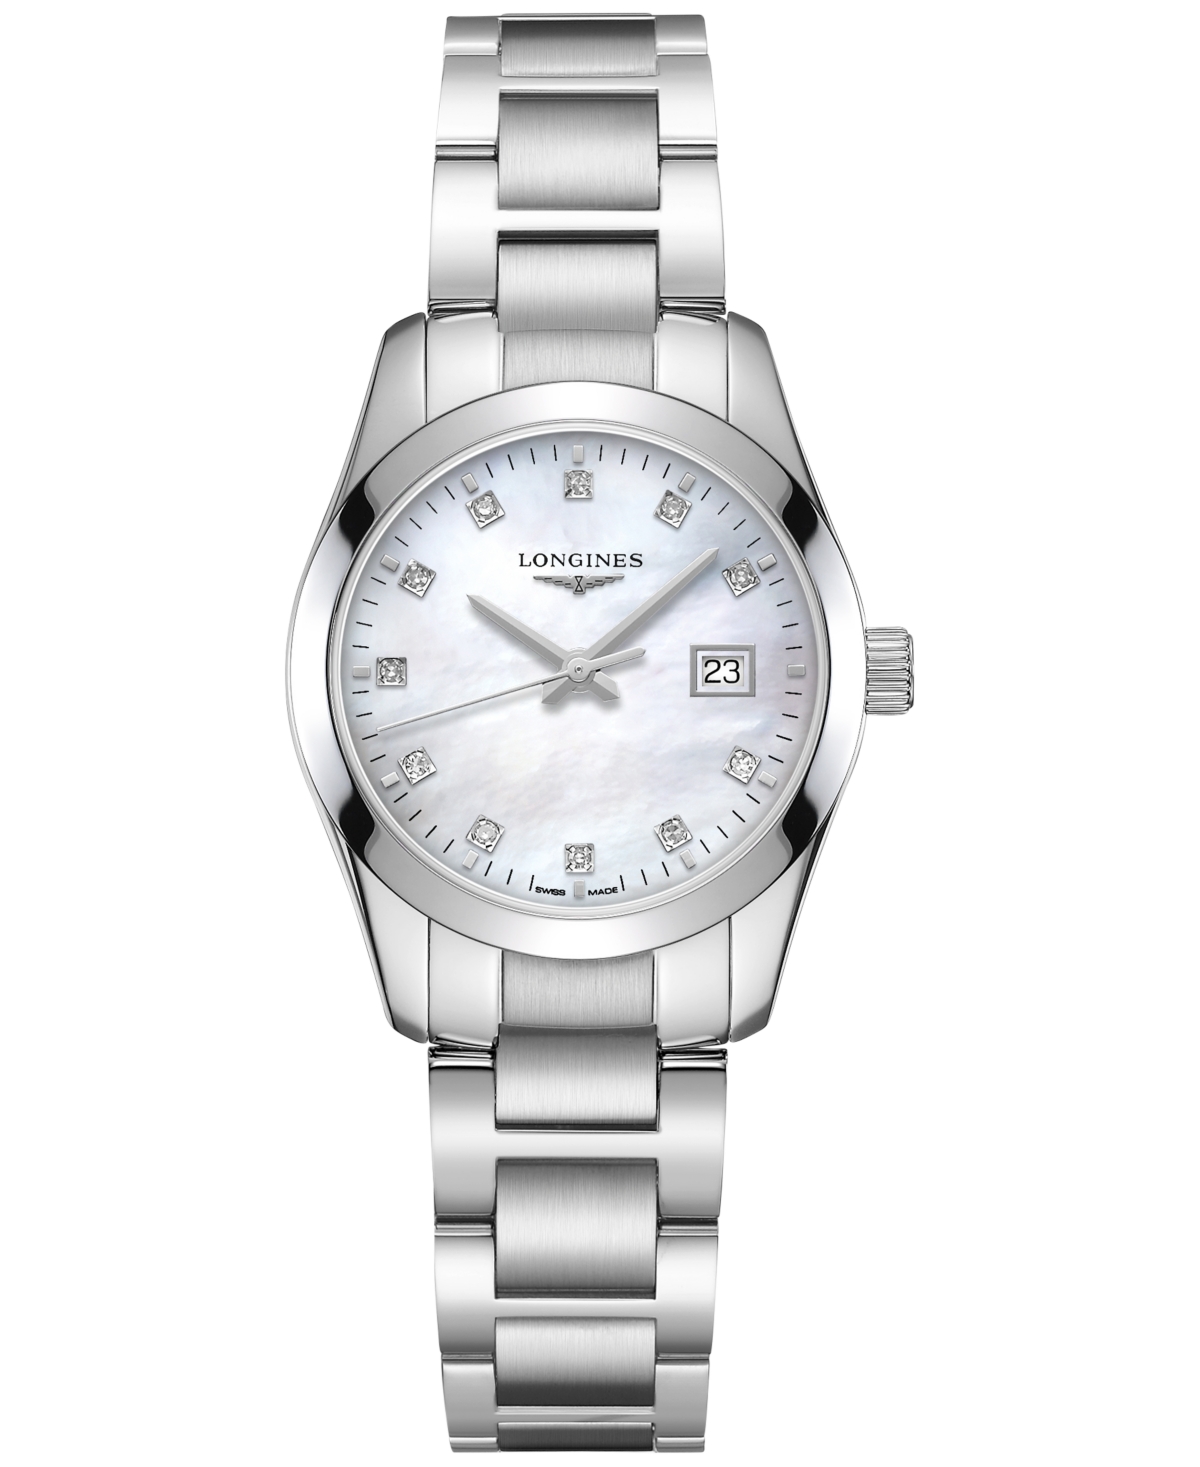 LONGINES WOMEN'S SWISS CONQUEST CLASSIC DIAMOND ACCENT STAINLESS STEEL BRACELET WATCH 29.5MM